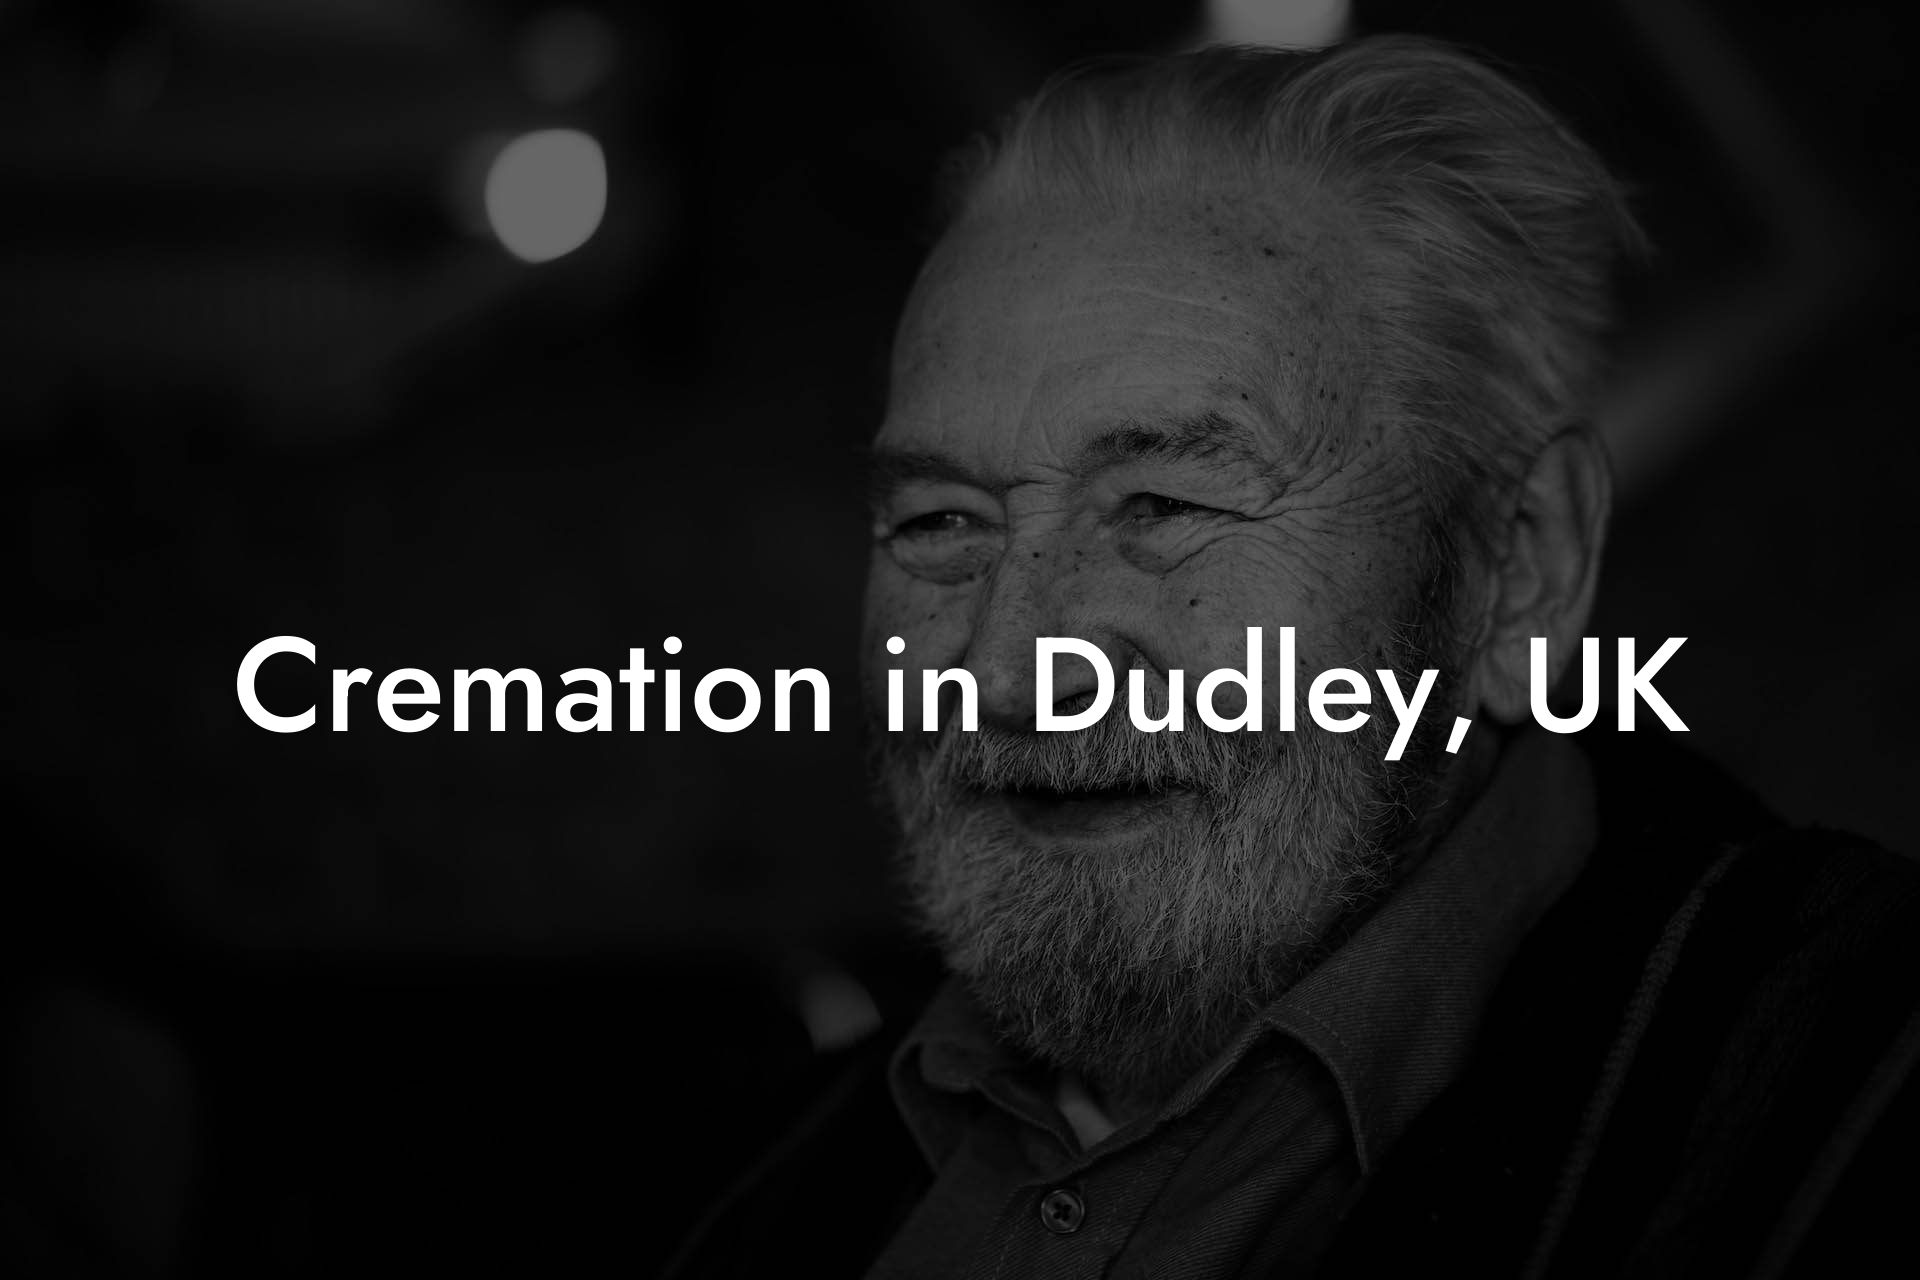 Cremation in Dudley, UK